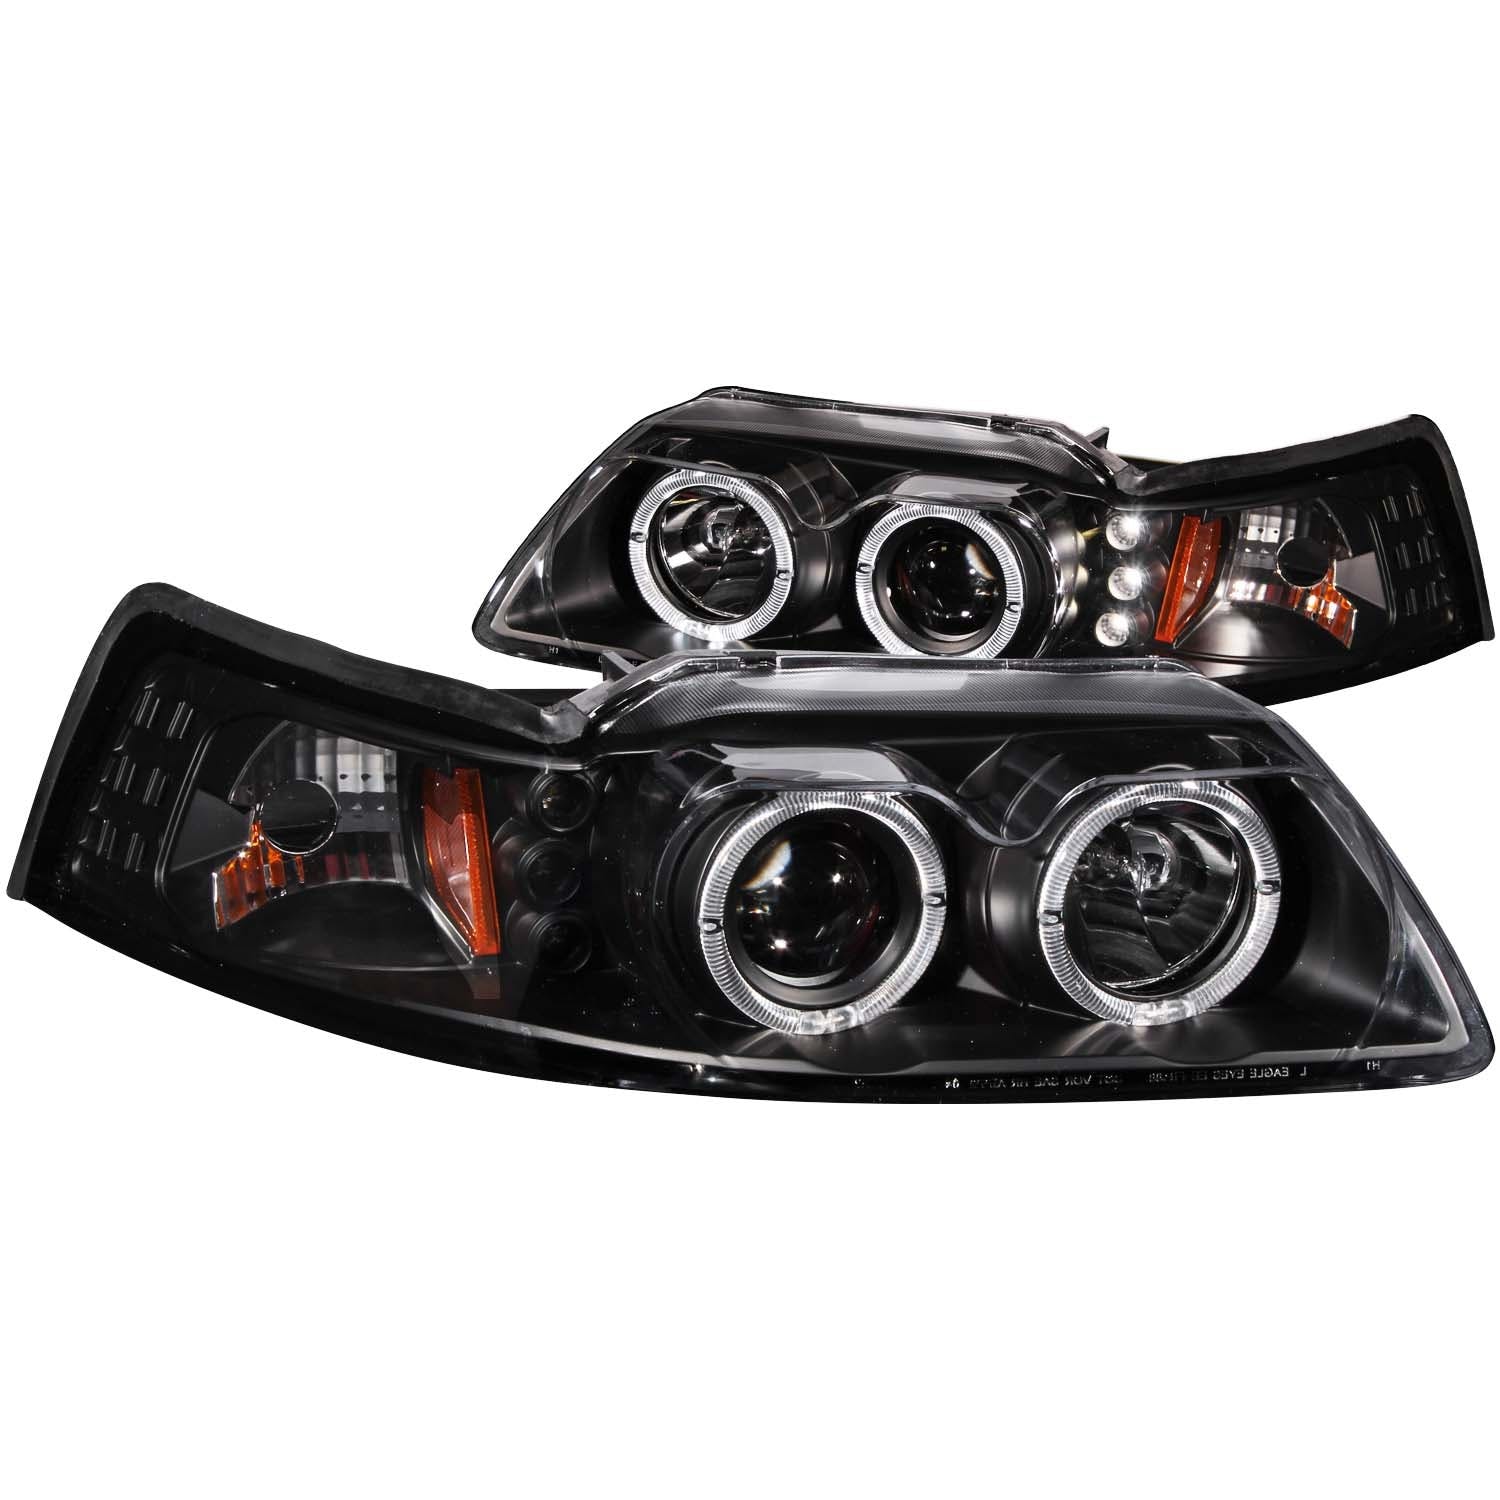 AnzoUSA 121303 Projector Headlights Black G2 (Dual Projector)